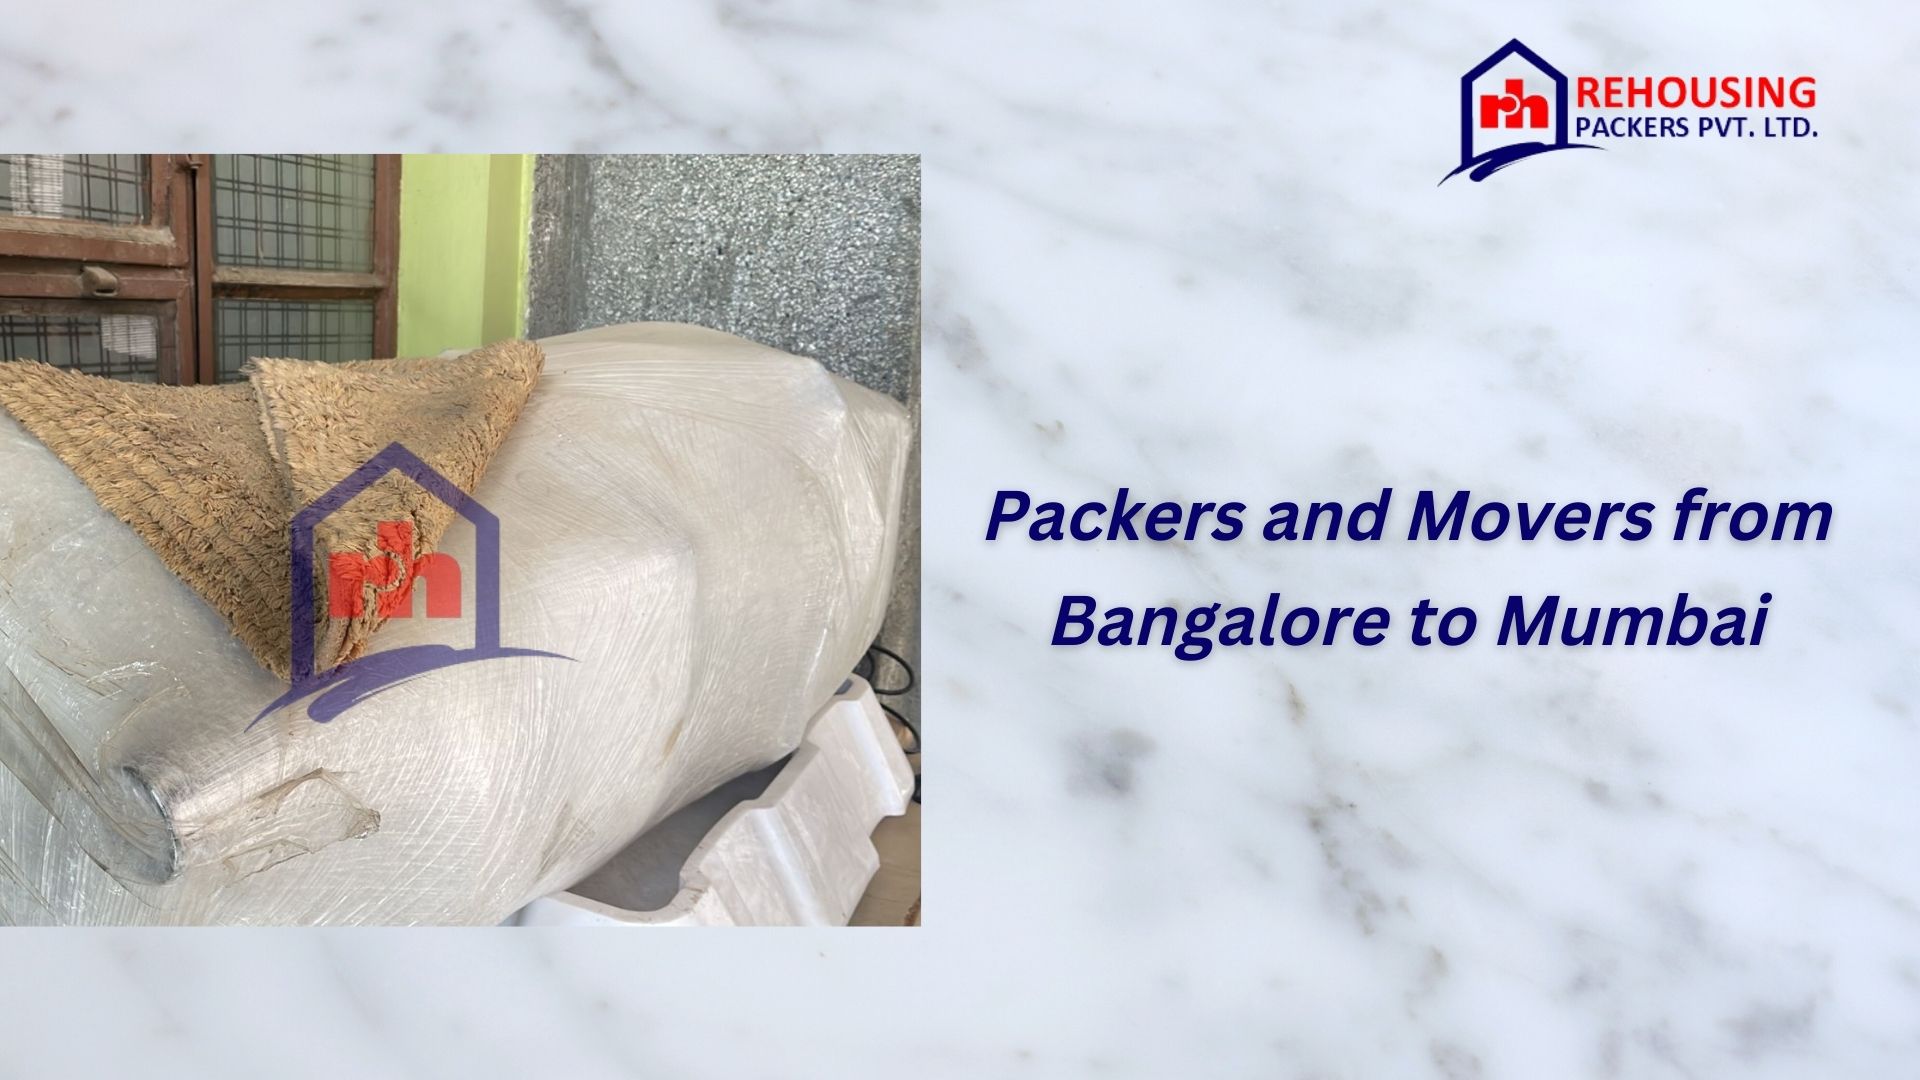 Packers and Movers from Bangalore to Mumbai | Charges Rehousing